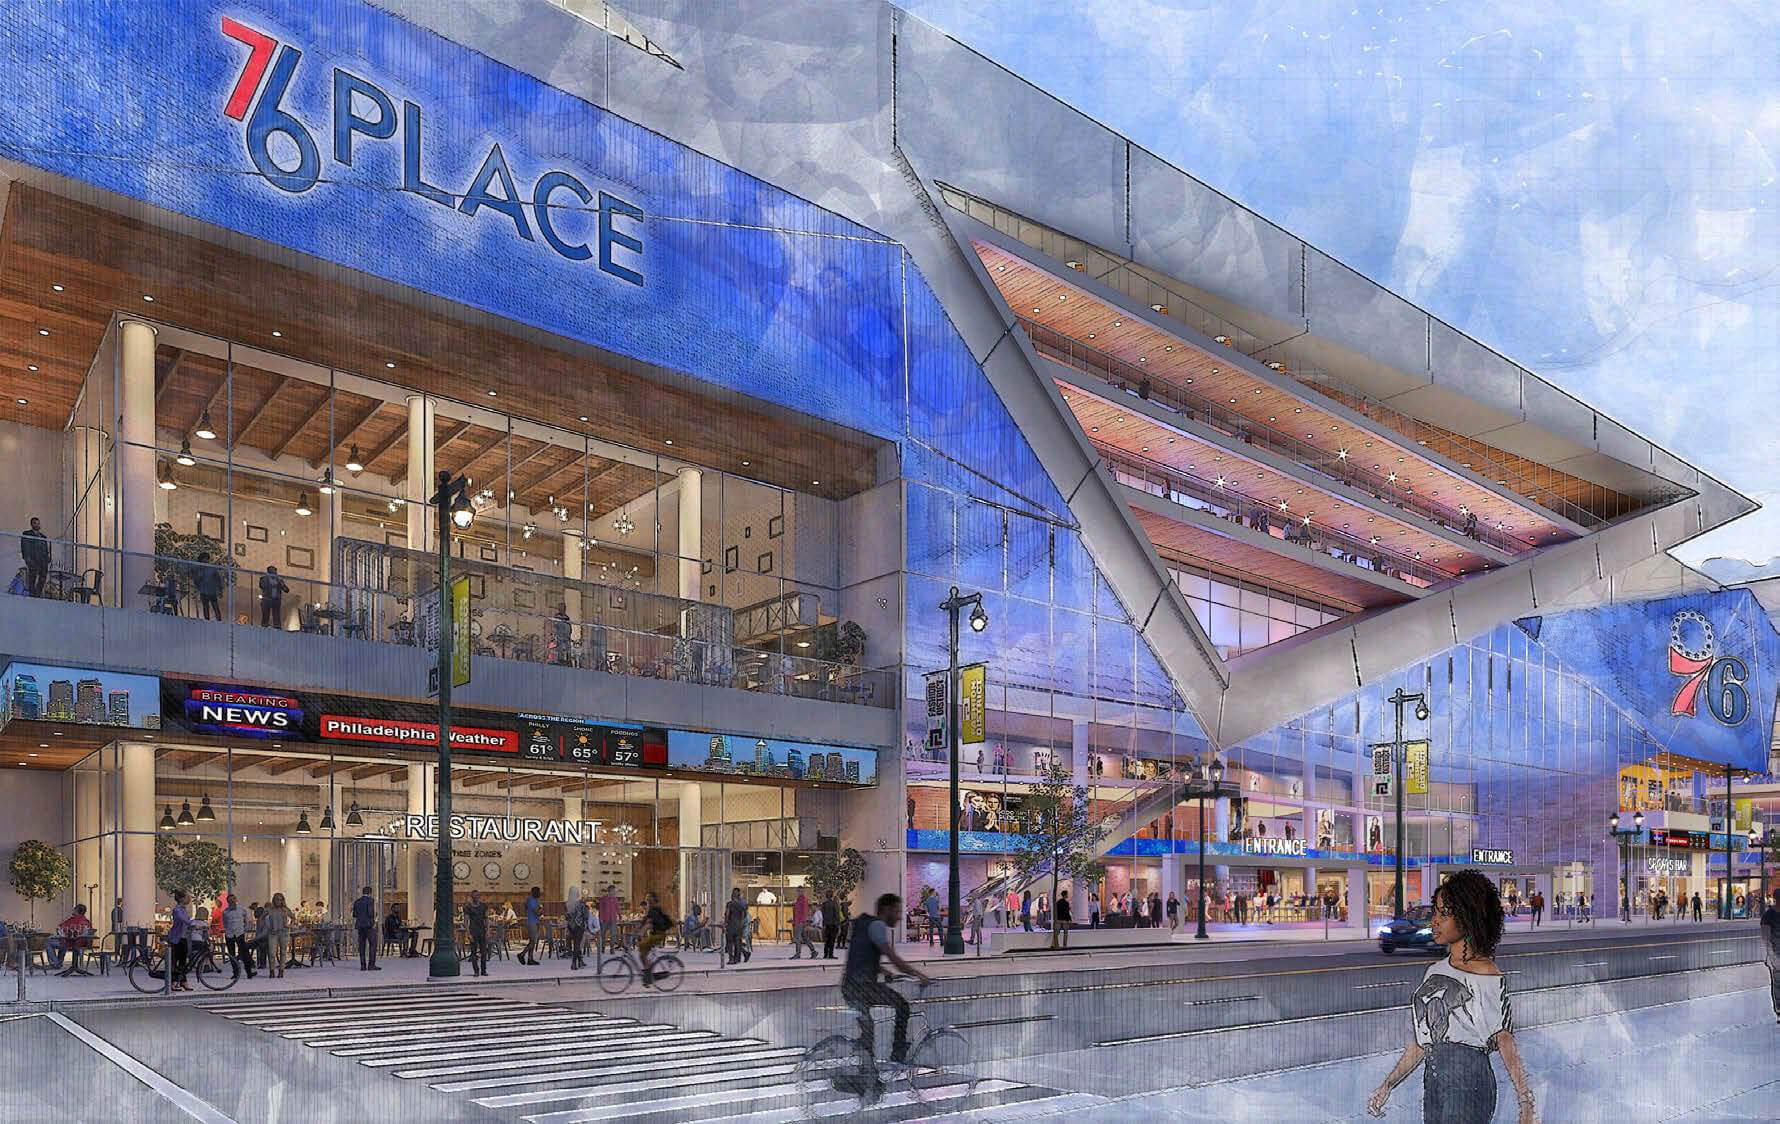 rendering of an arena exterior